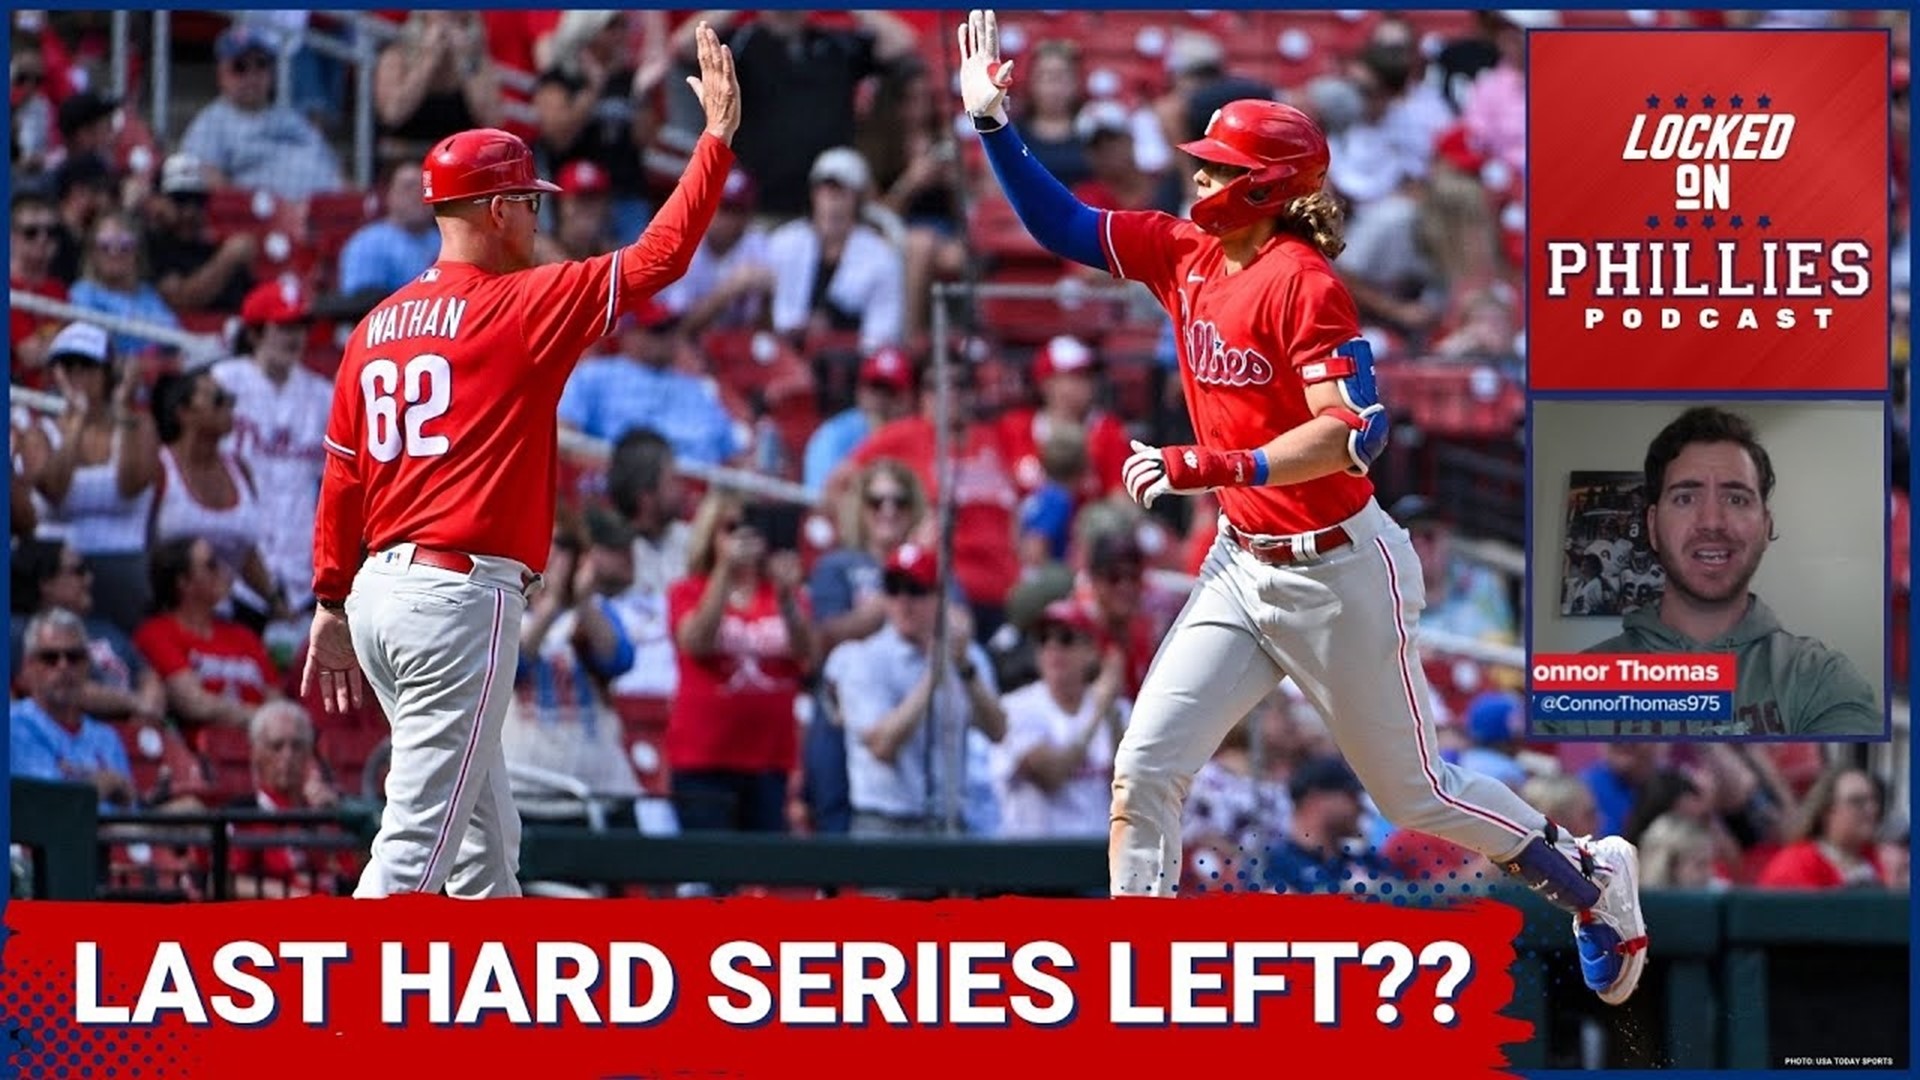 In today's episode, Connor reacts to the Philadelphia Phillies' weekend series with the St. Louis Cardinals.